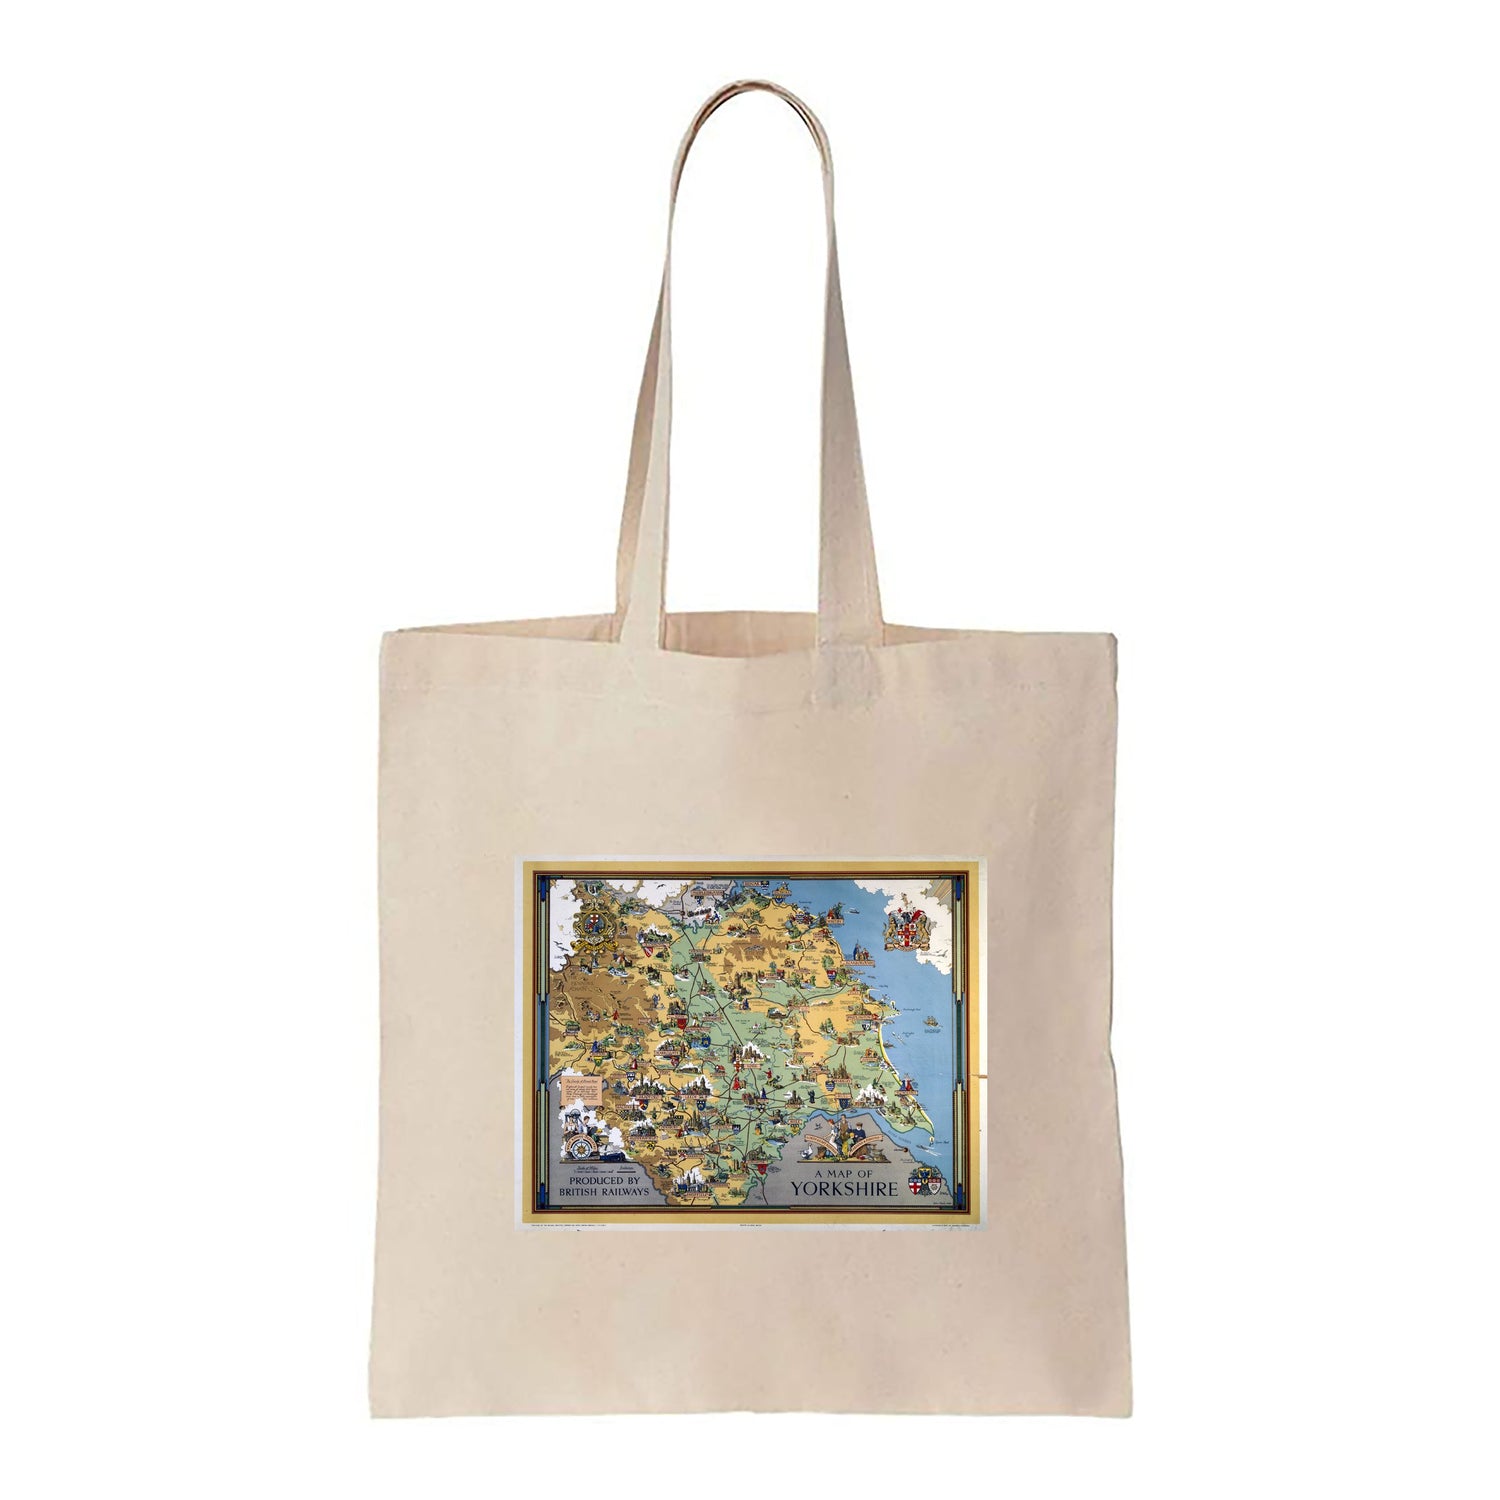 A Map of Yorkshire - British Railways - Canvas Tote Bag